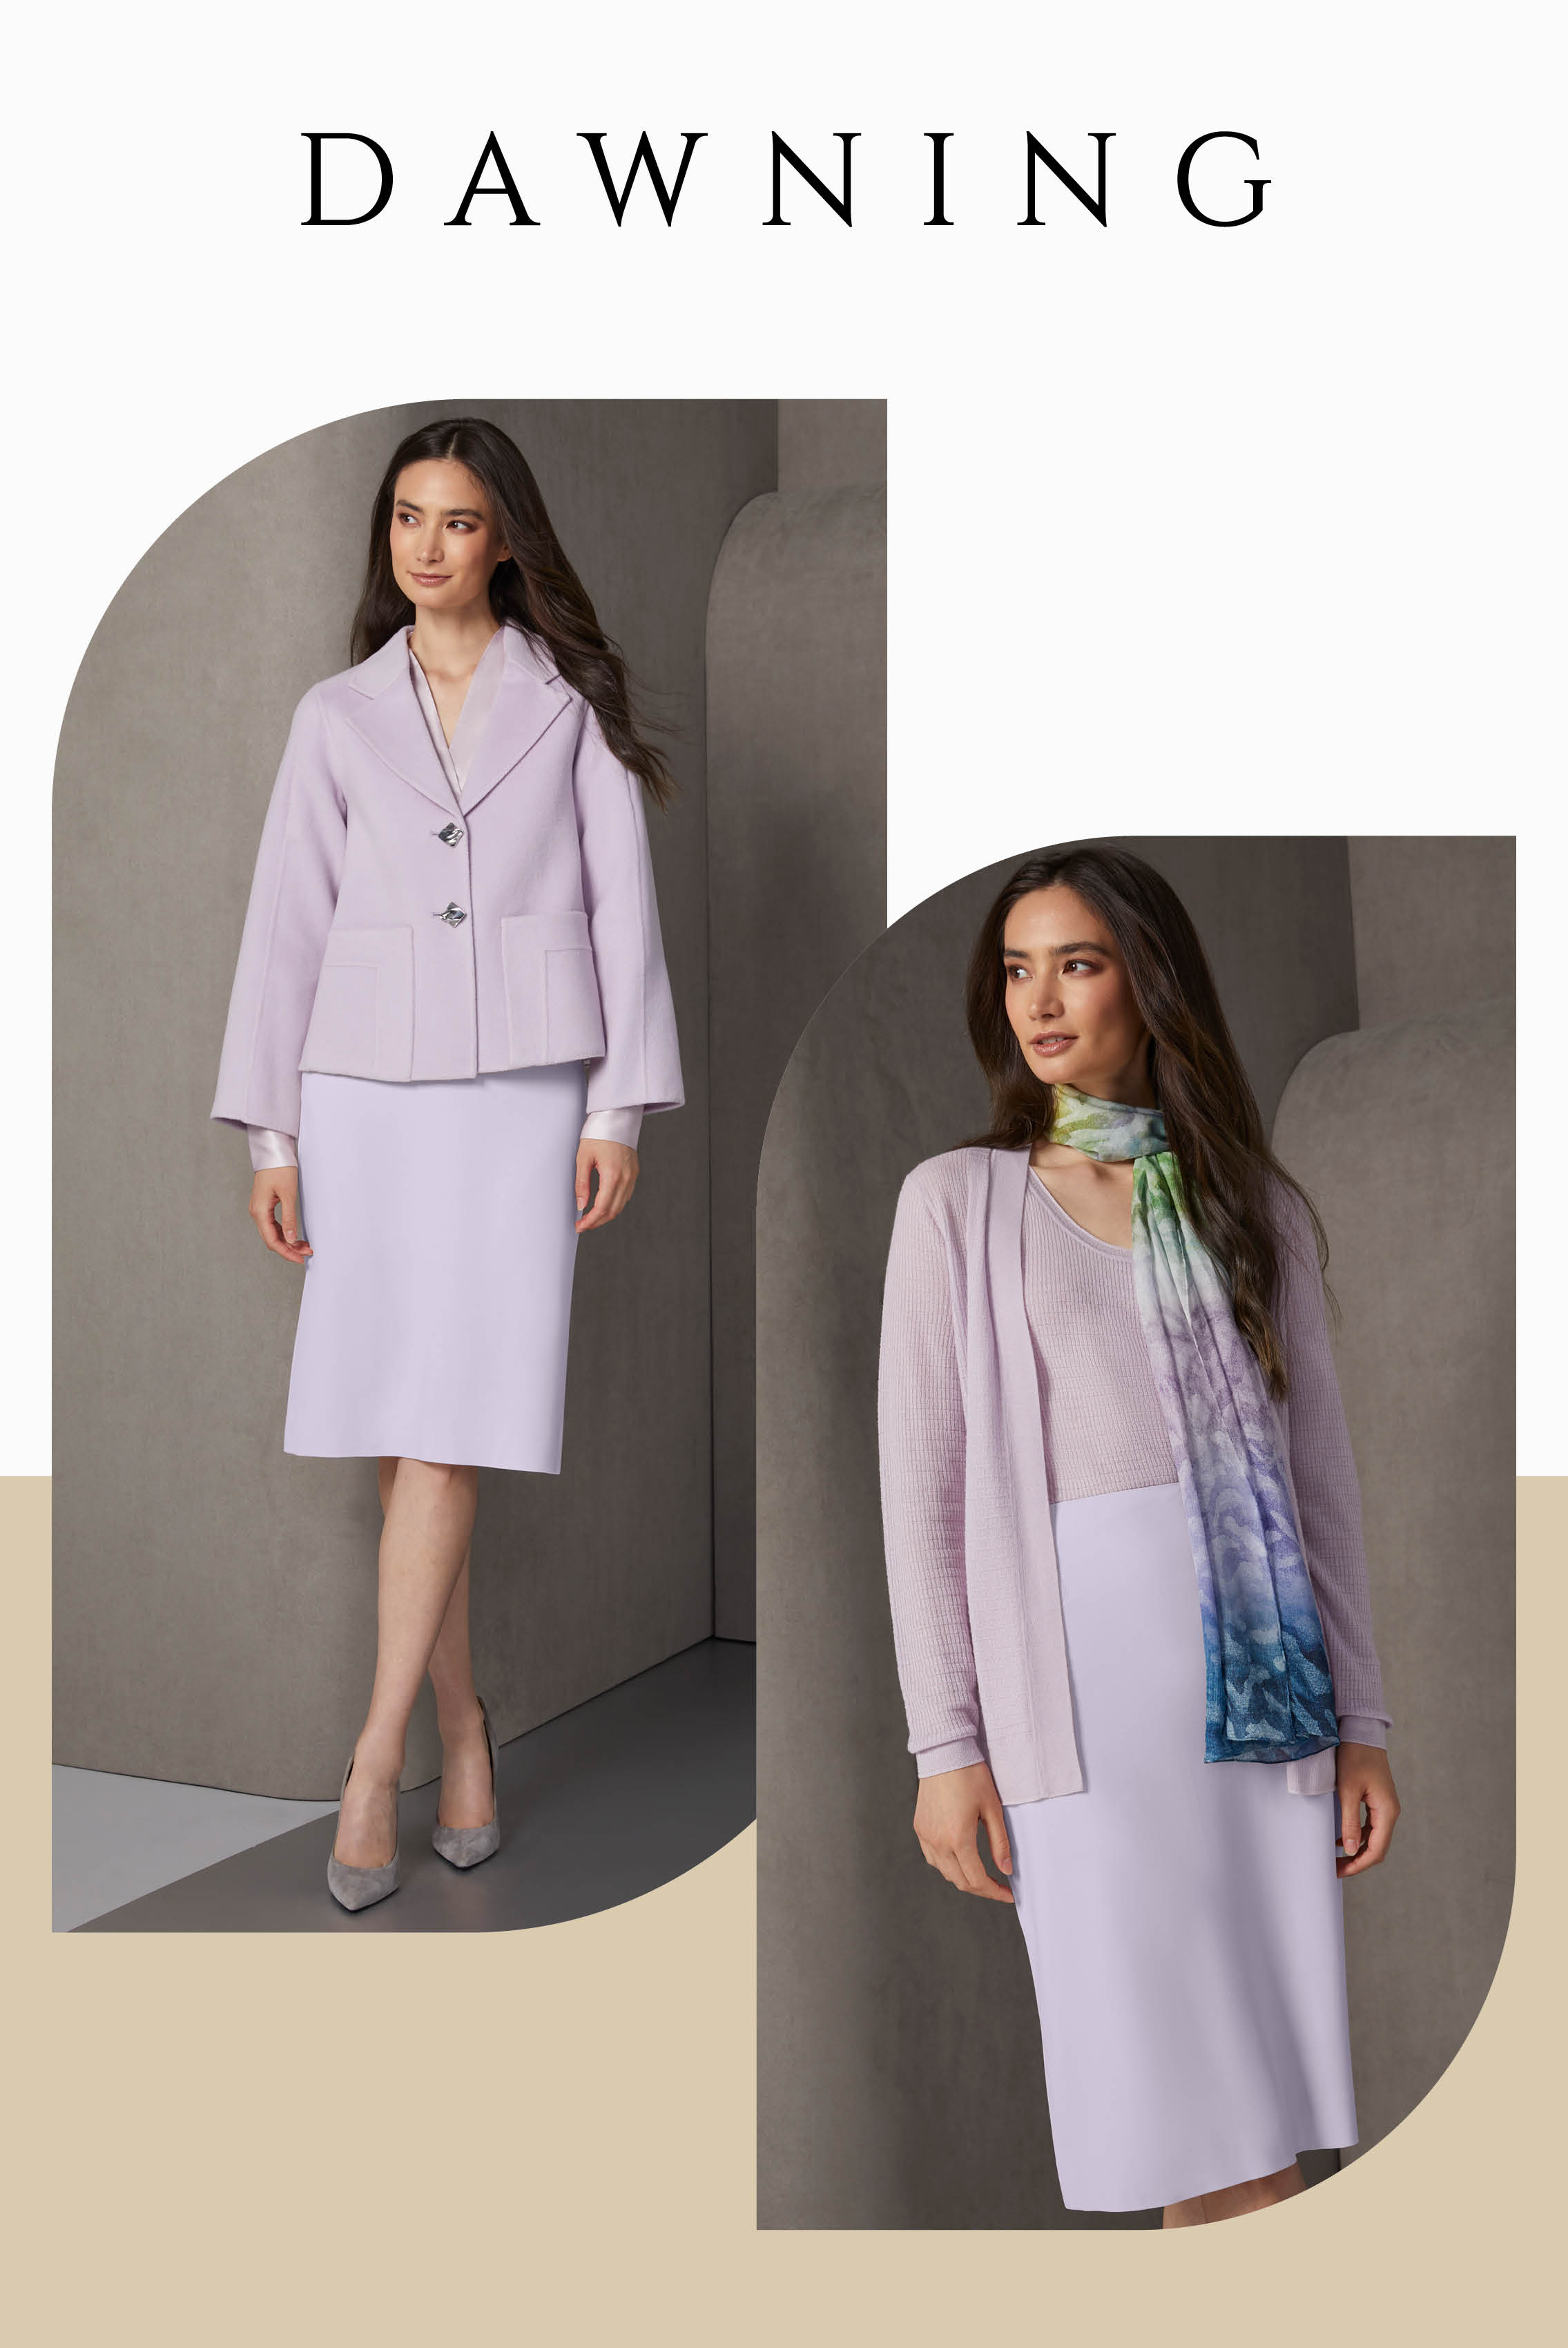 Shiny, matte, and plush textures enrich this look in a unique winter shade of lavender fog. The wooly swing jacket has front frames and multiple back seams that coordinate with the panels and double back slits of the pencil skirt.